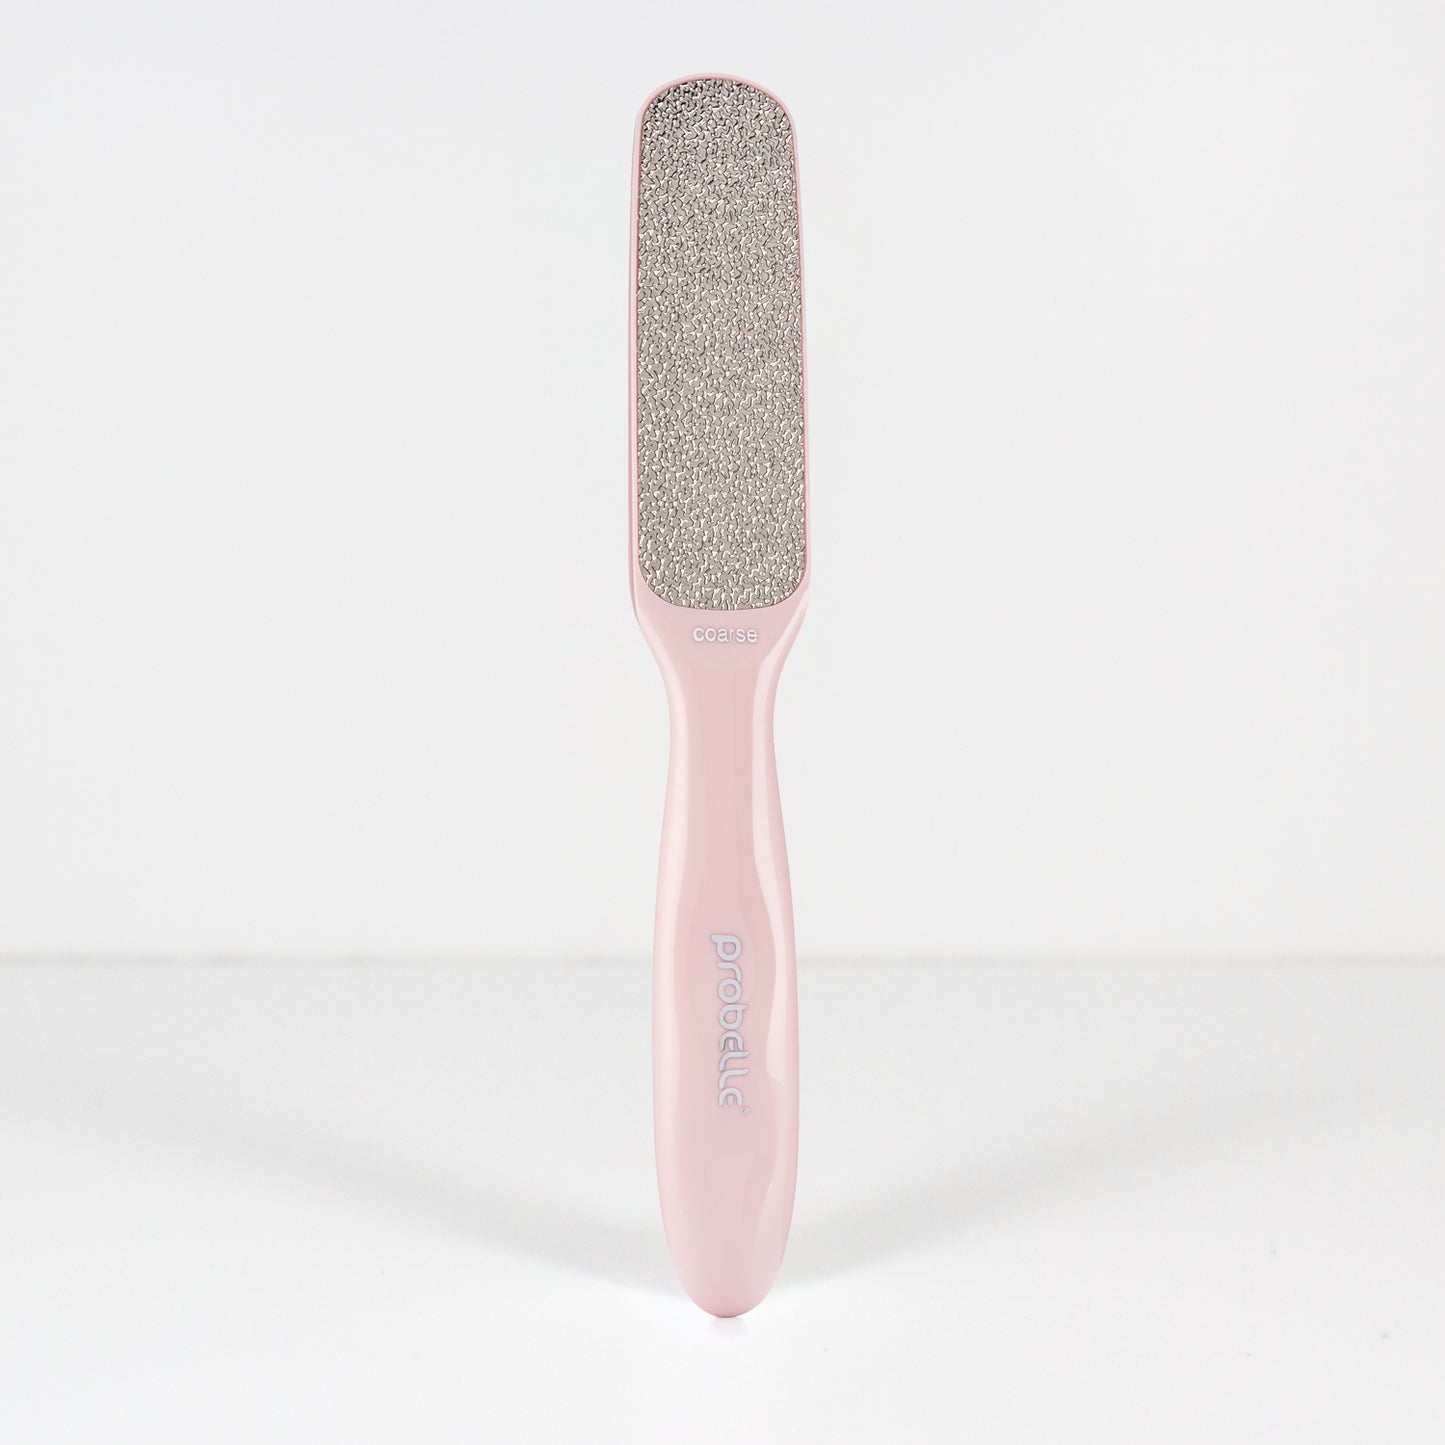 Foot File Callus Remover - N081114 - IdeaStage Promotional Products